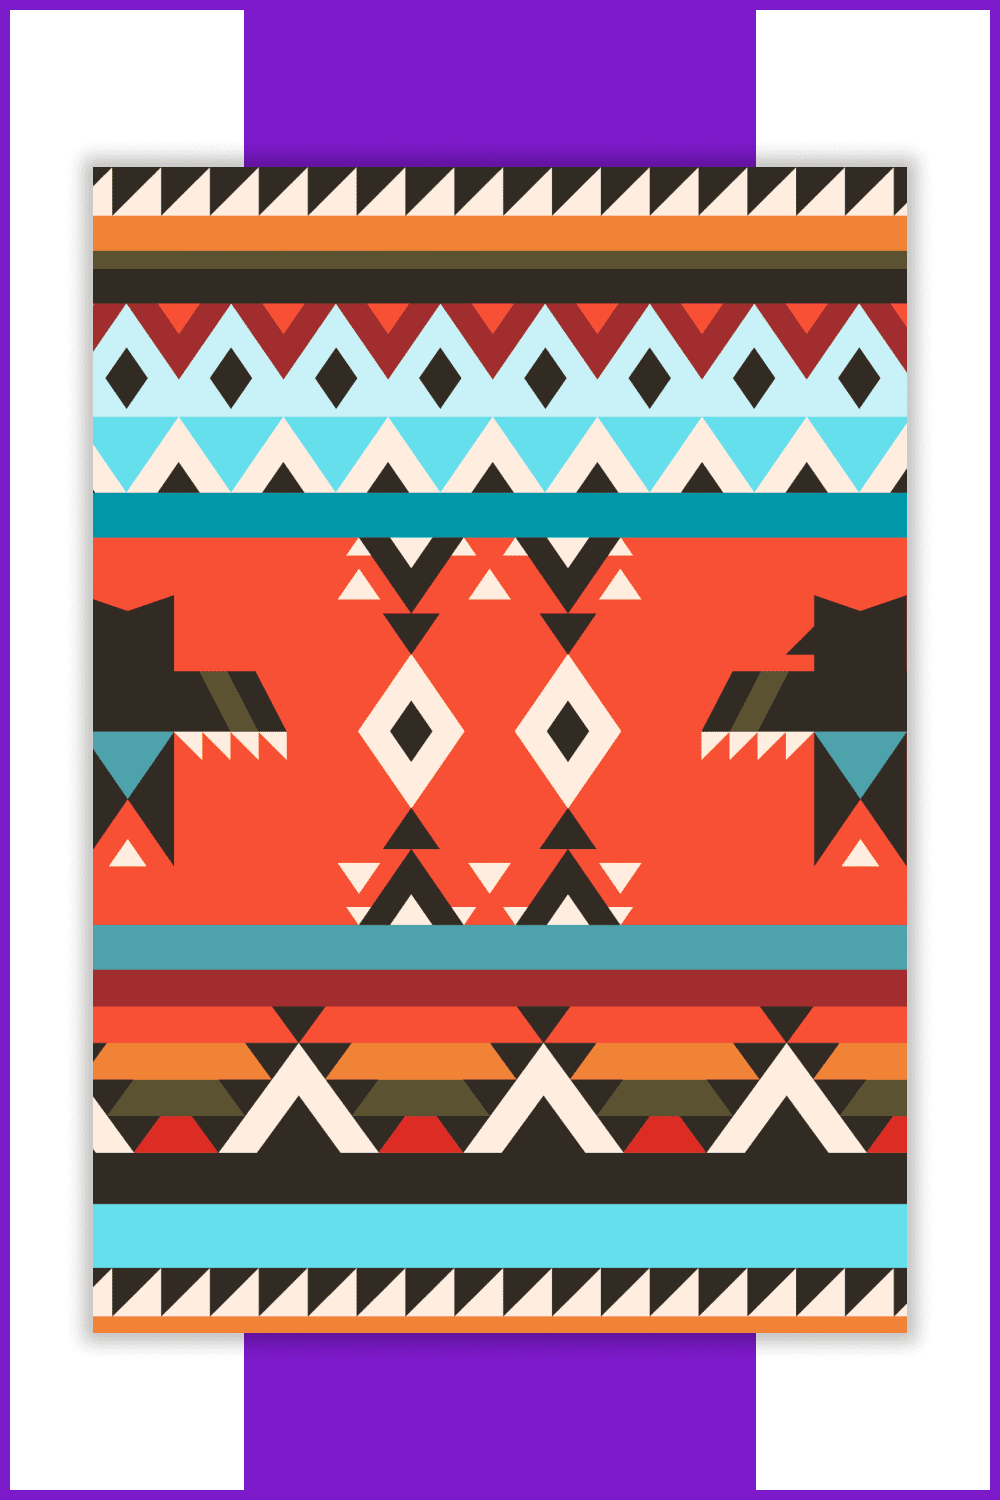 Image of native American vibrant pattern.